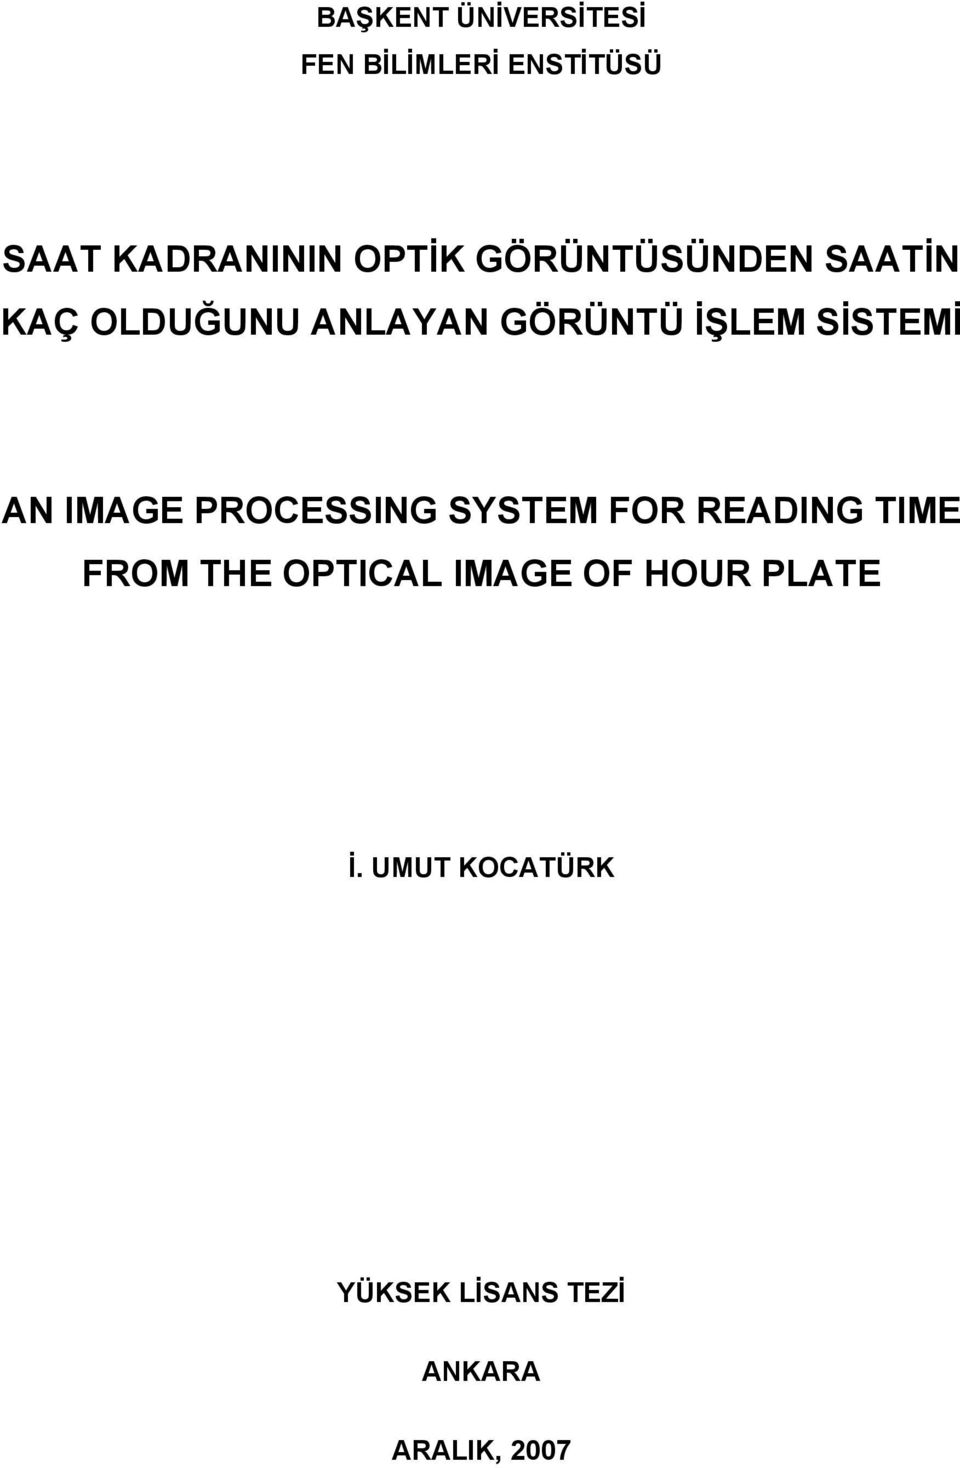 IMAGE PROCESSING SYSTEM FOR READING TIME FROM THE OPTICAL IMAGE OF